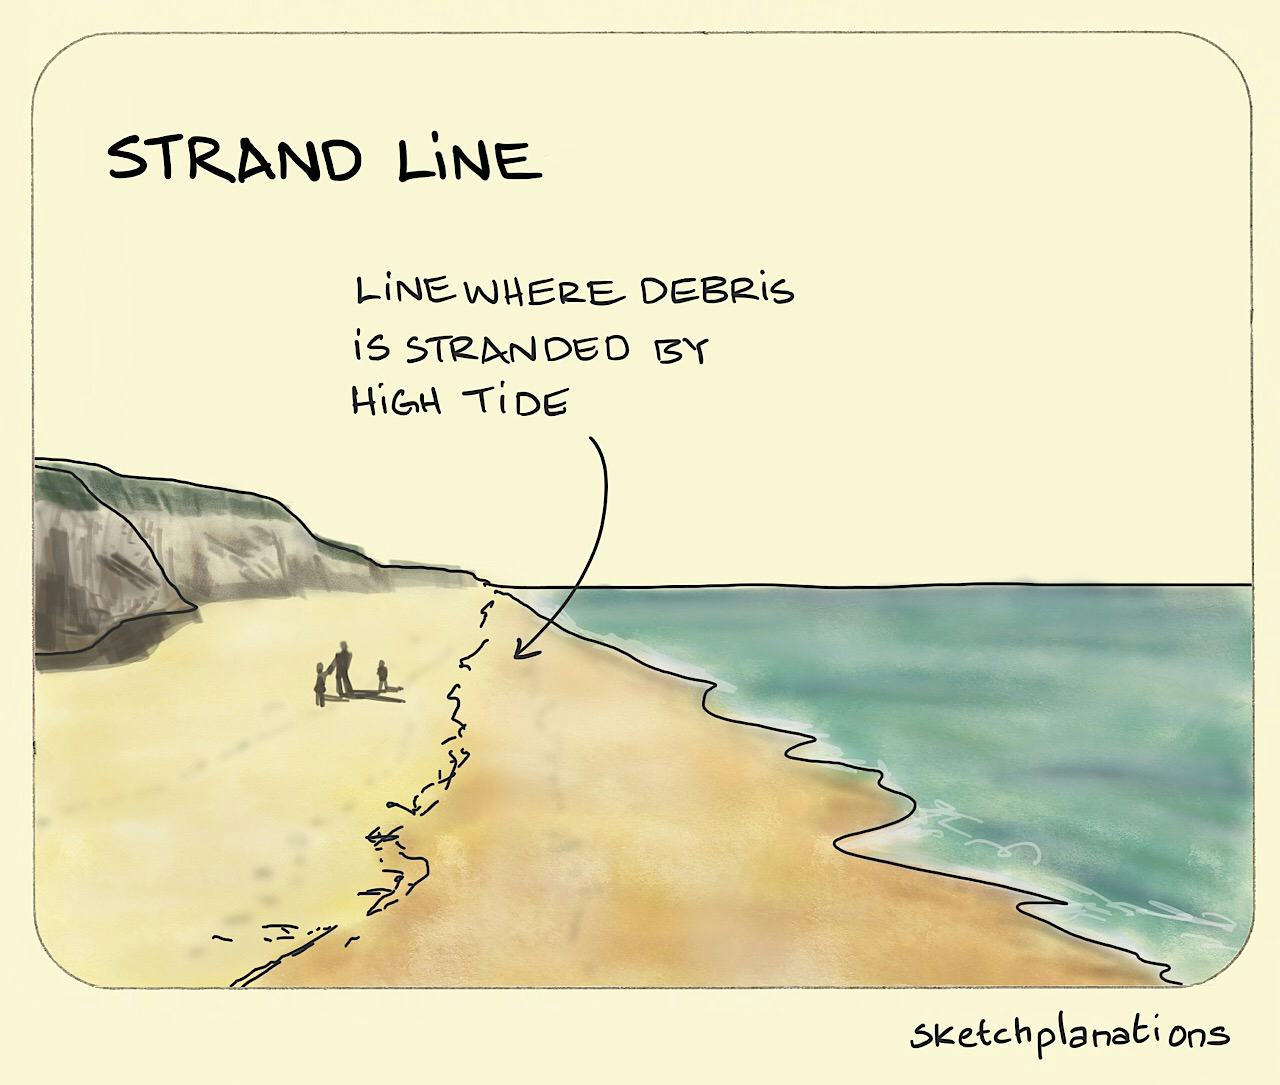 Strand line illustration: a beach showing the line where debris is stranded by high tide